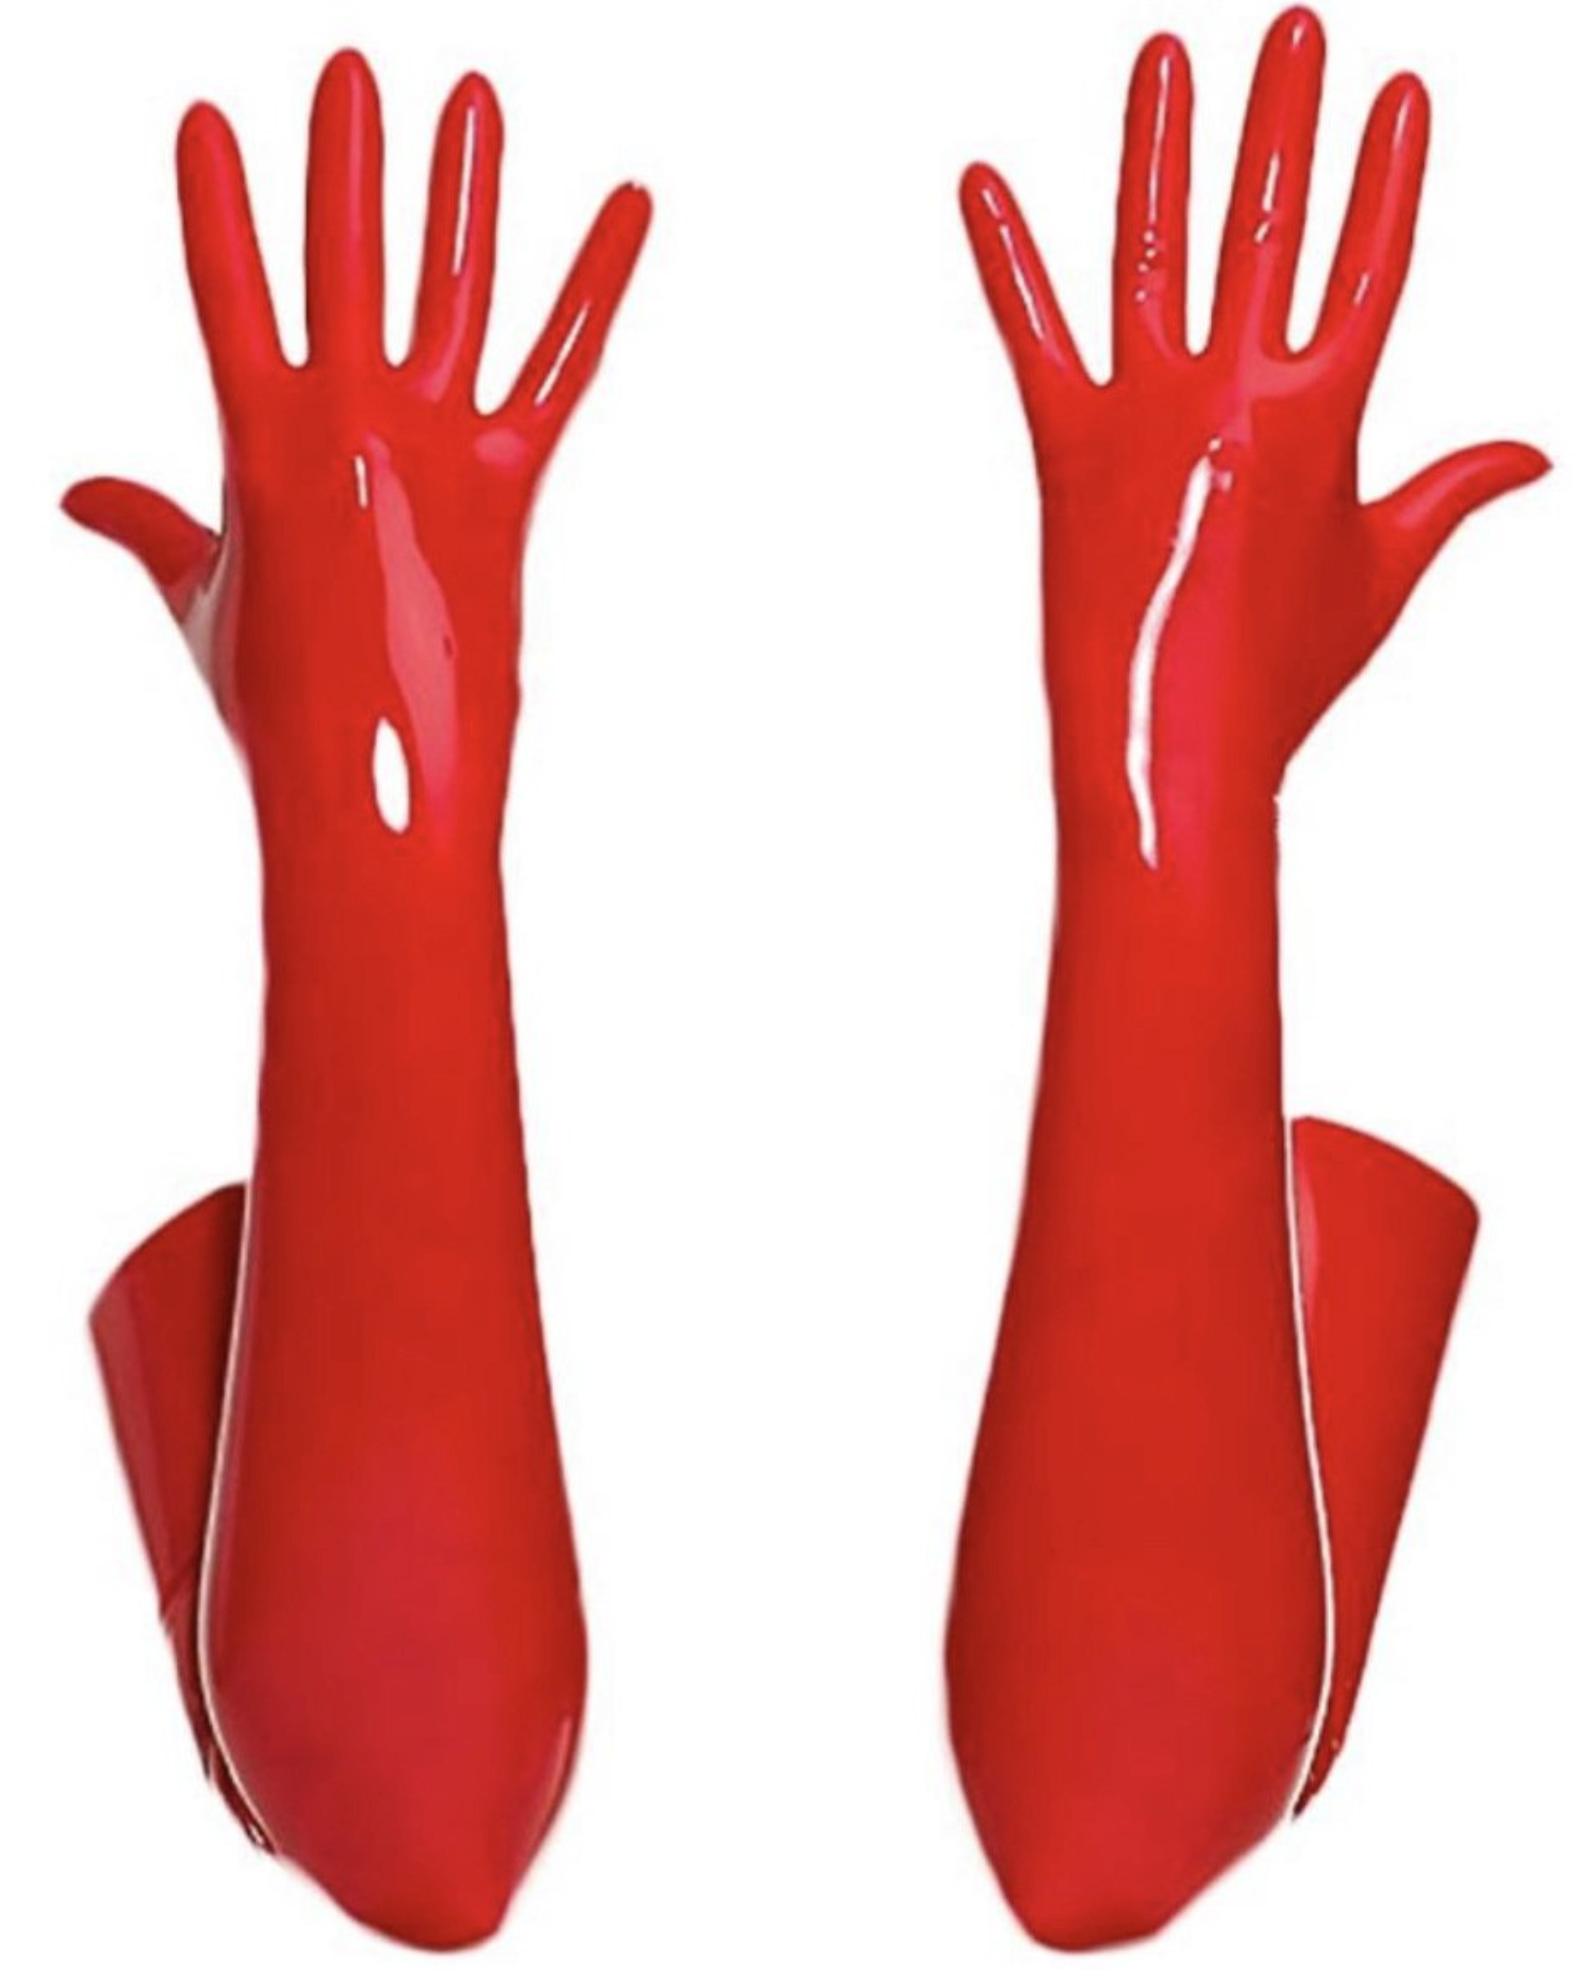 Long Liquid Gloves gloves LAVAH Red S/M 